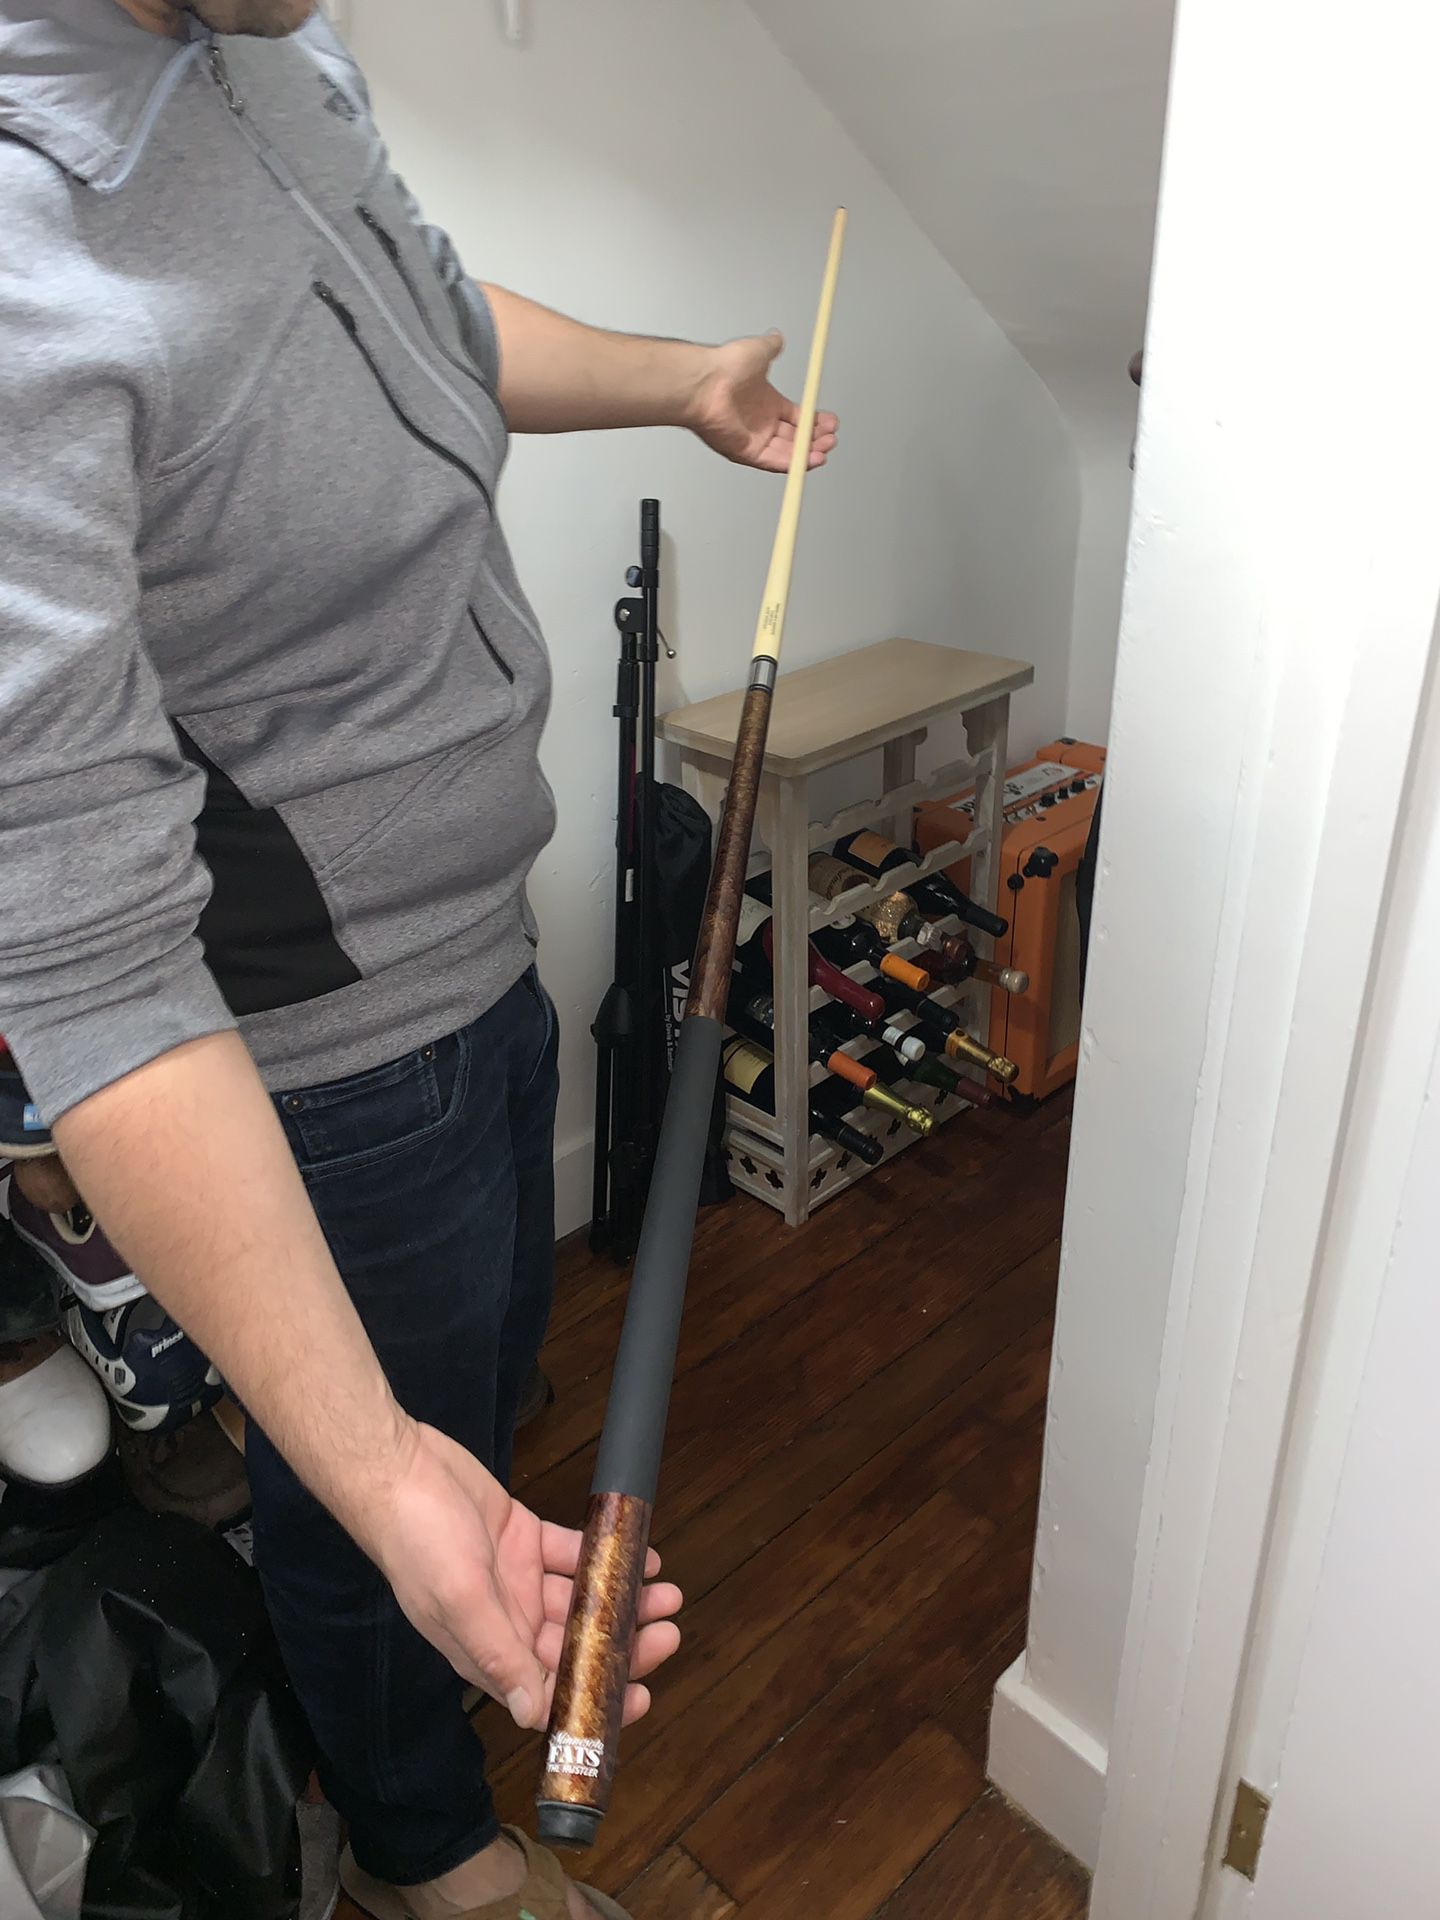 Pool cue with bag